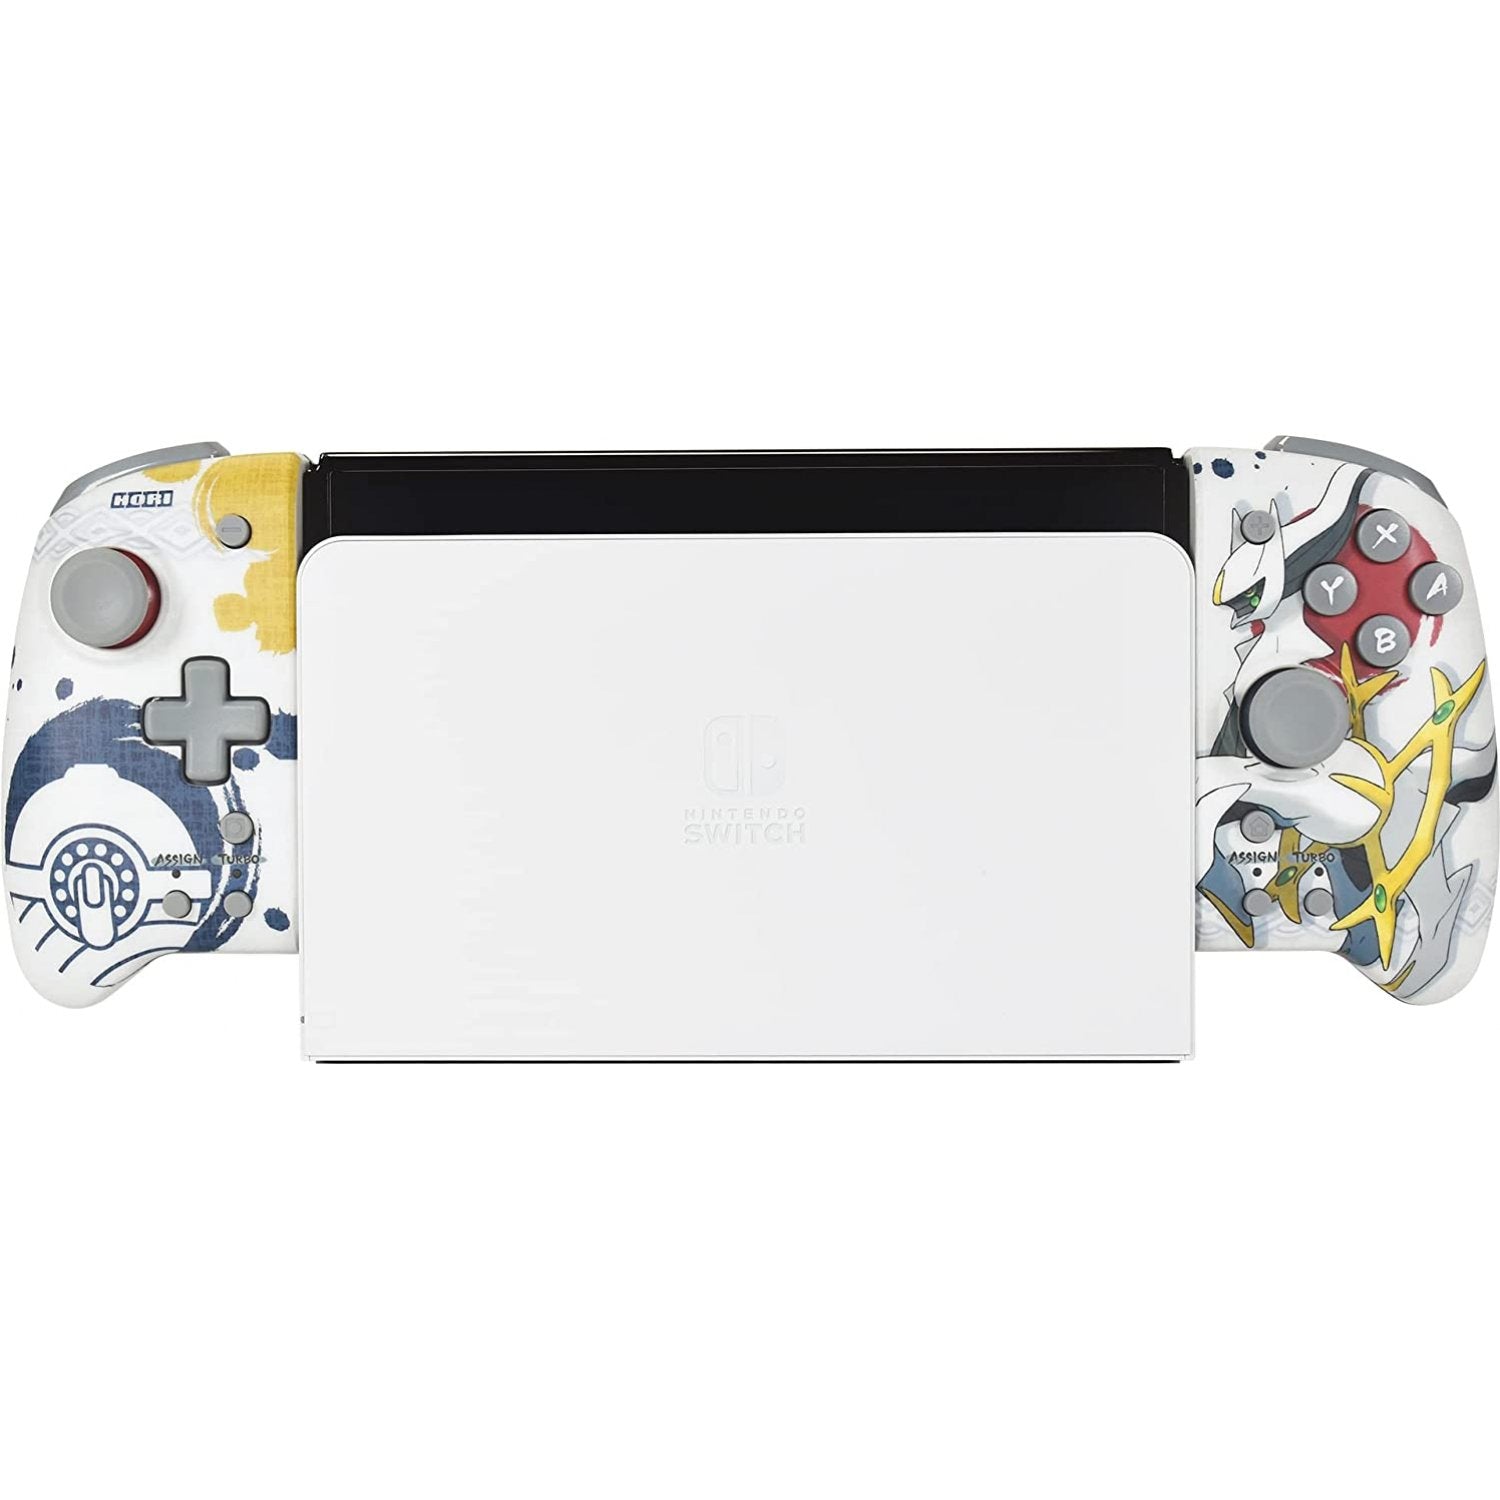 Pre-order the new Split Pad Pro controller inspired by 'Pokémon Legends:  Arceus